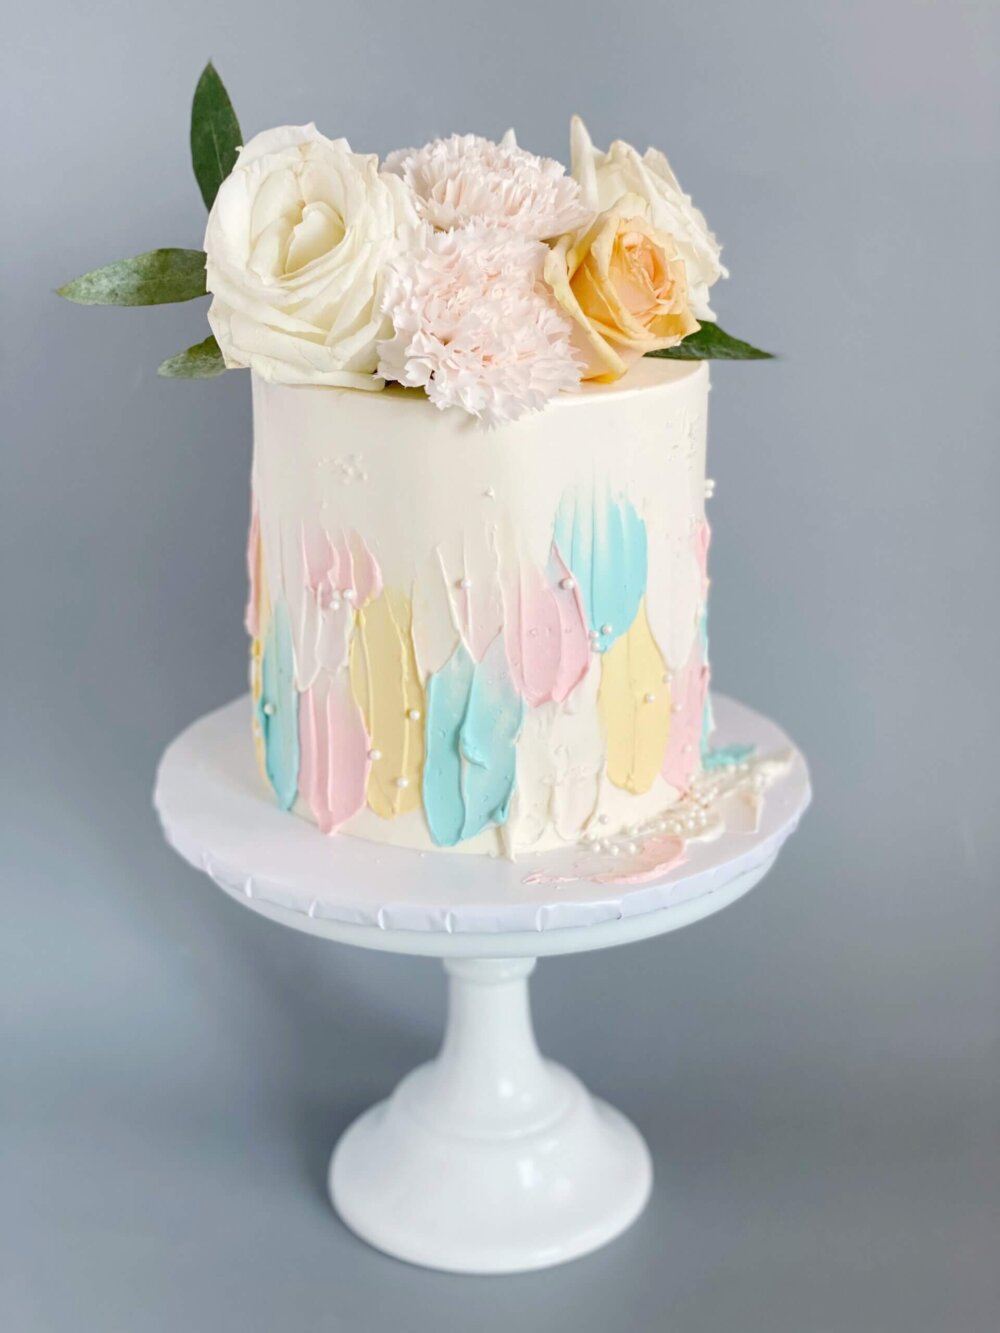 Gender reveal cake with flowers